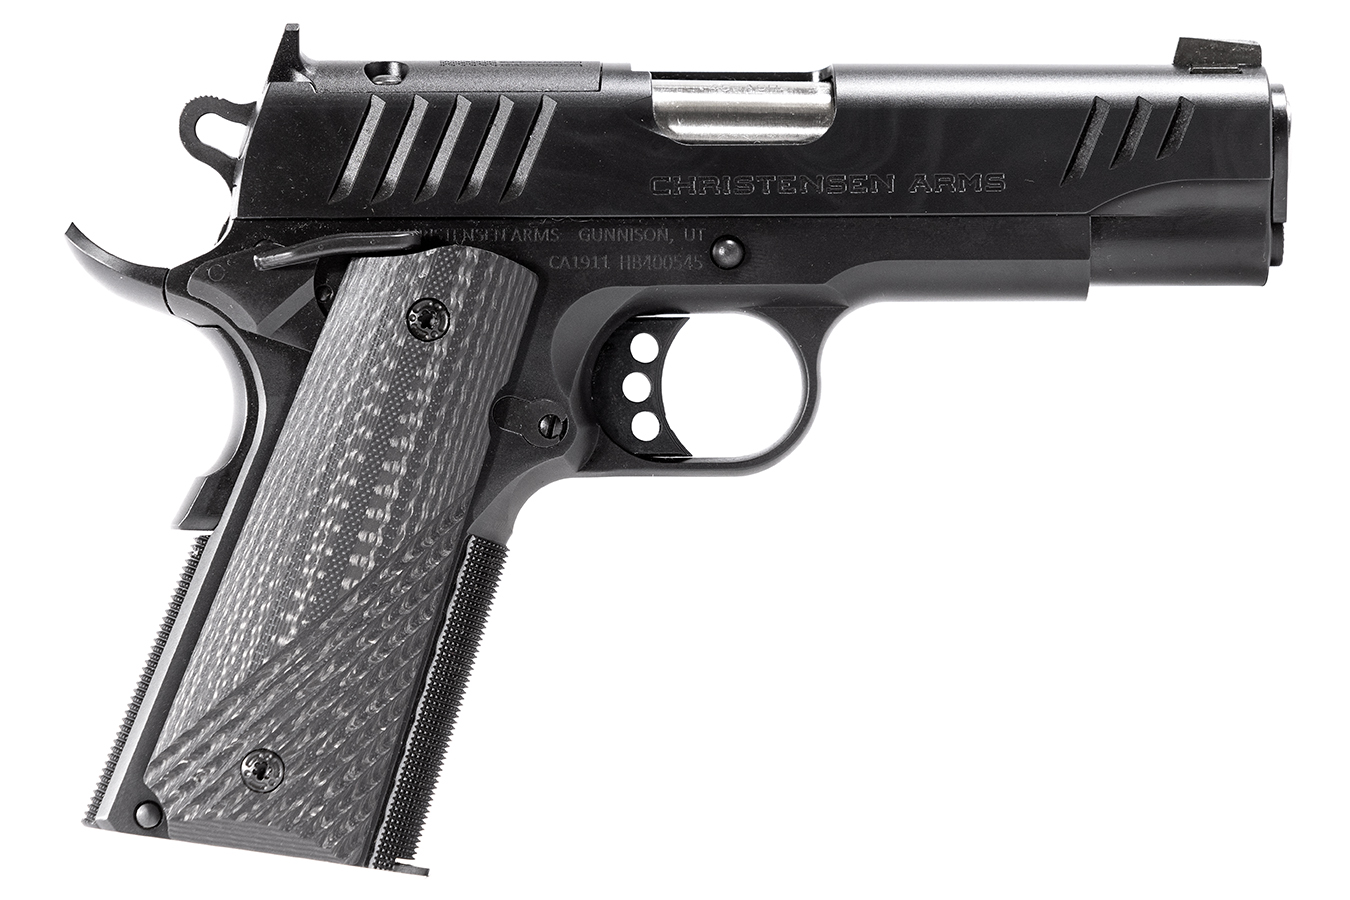 No. 15 Best Selling: CHRISTENSEN ARMS CA1911 45 ACP PISTOL WITH 4.25 BARREL